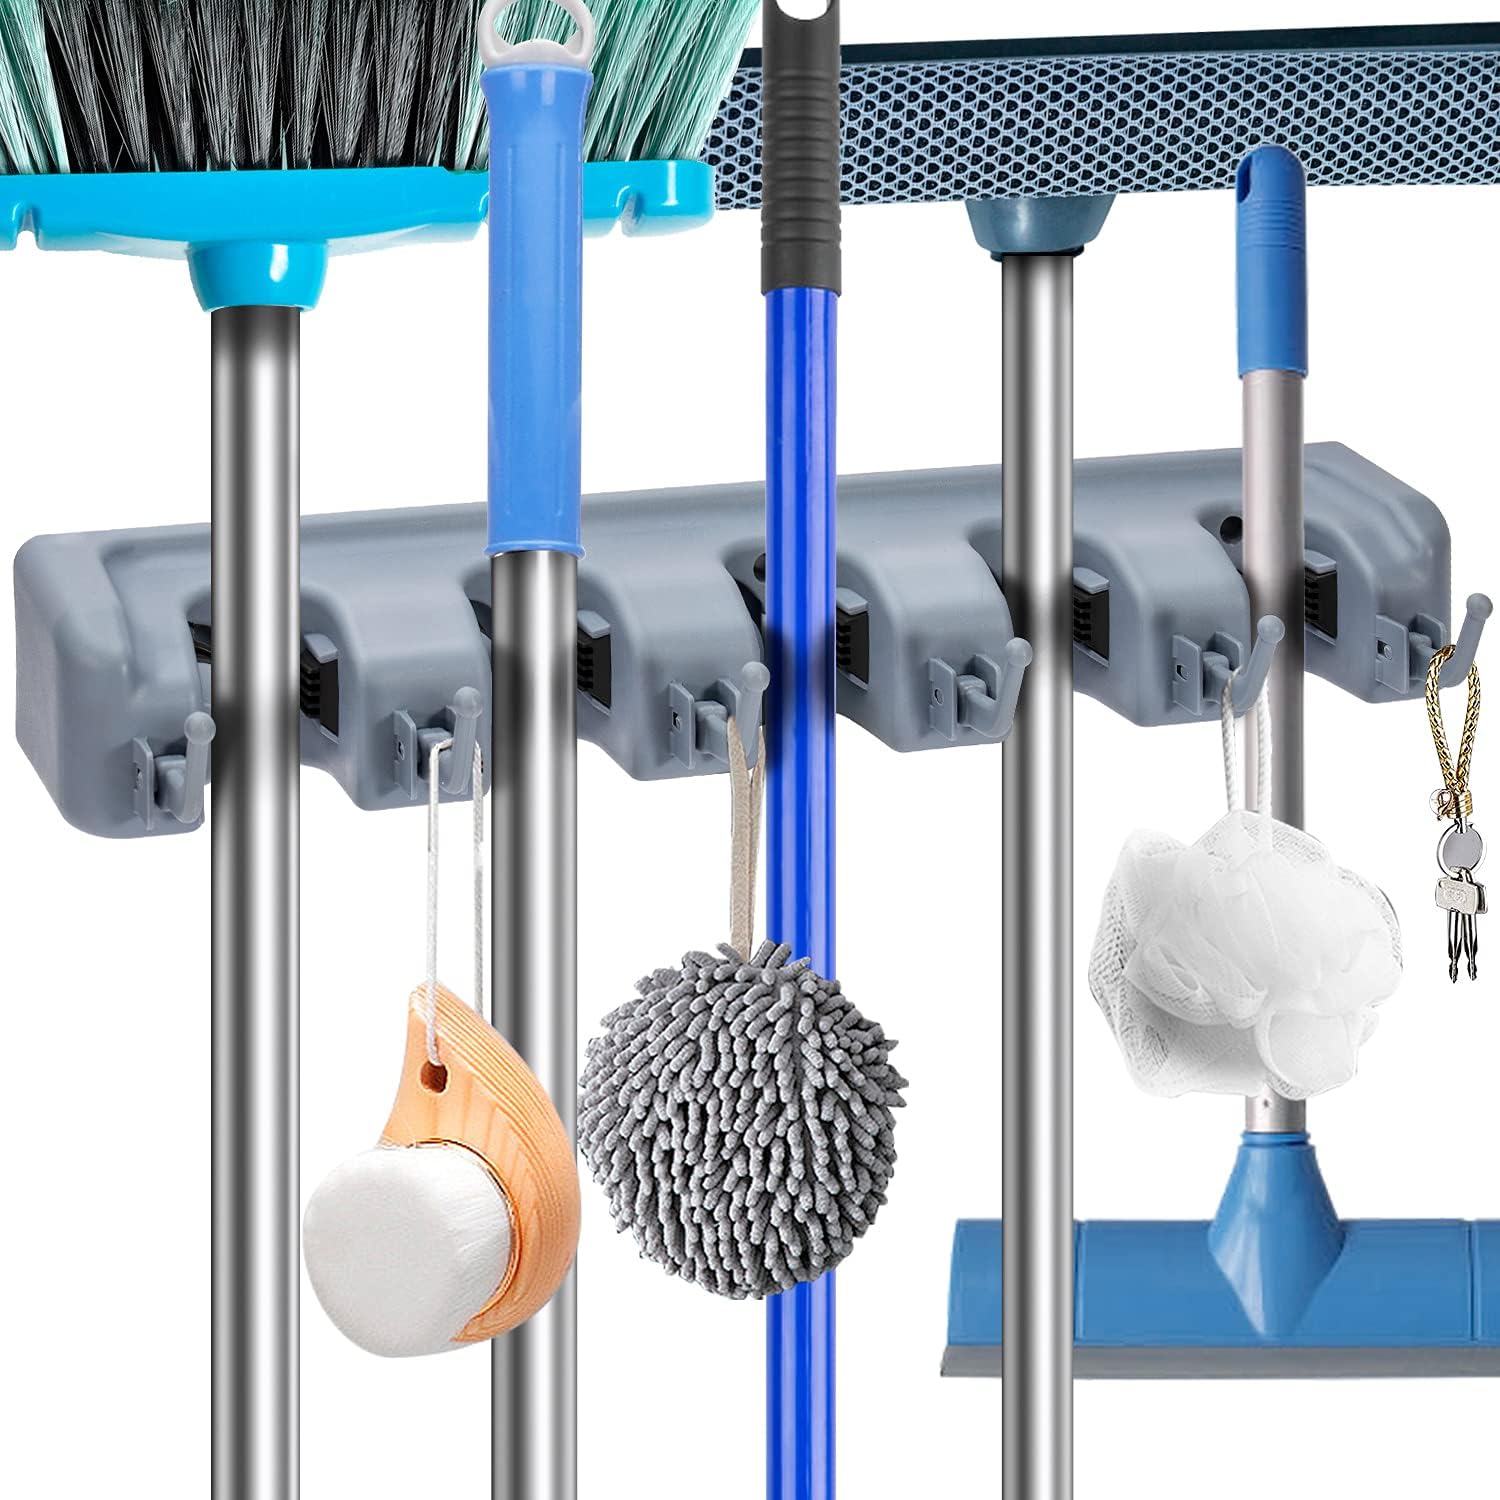 4 Position 5 Hooks Lianzhi Mop Bracket,Non-Slip Automatically Lock Holder Mounted Organiser for Mops Brooms and Garden Tool Wall Bracket with 5 Hooks and 6 Quick Release